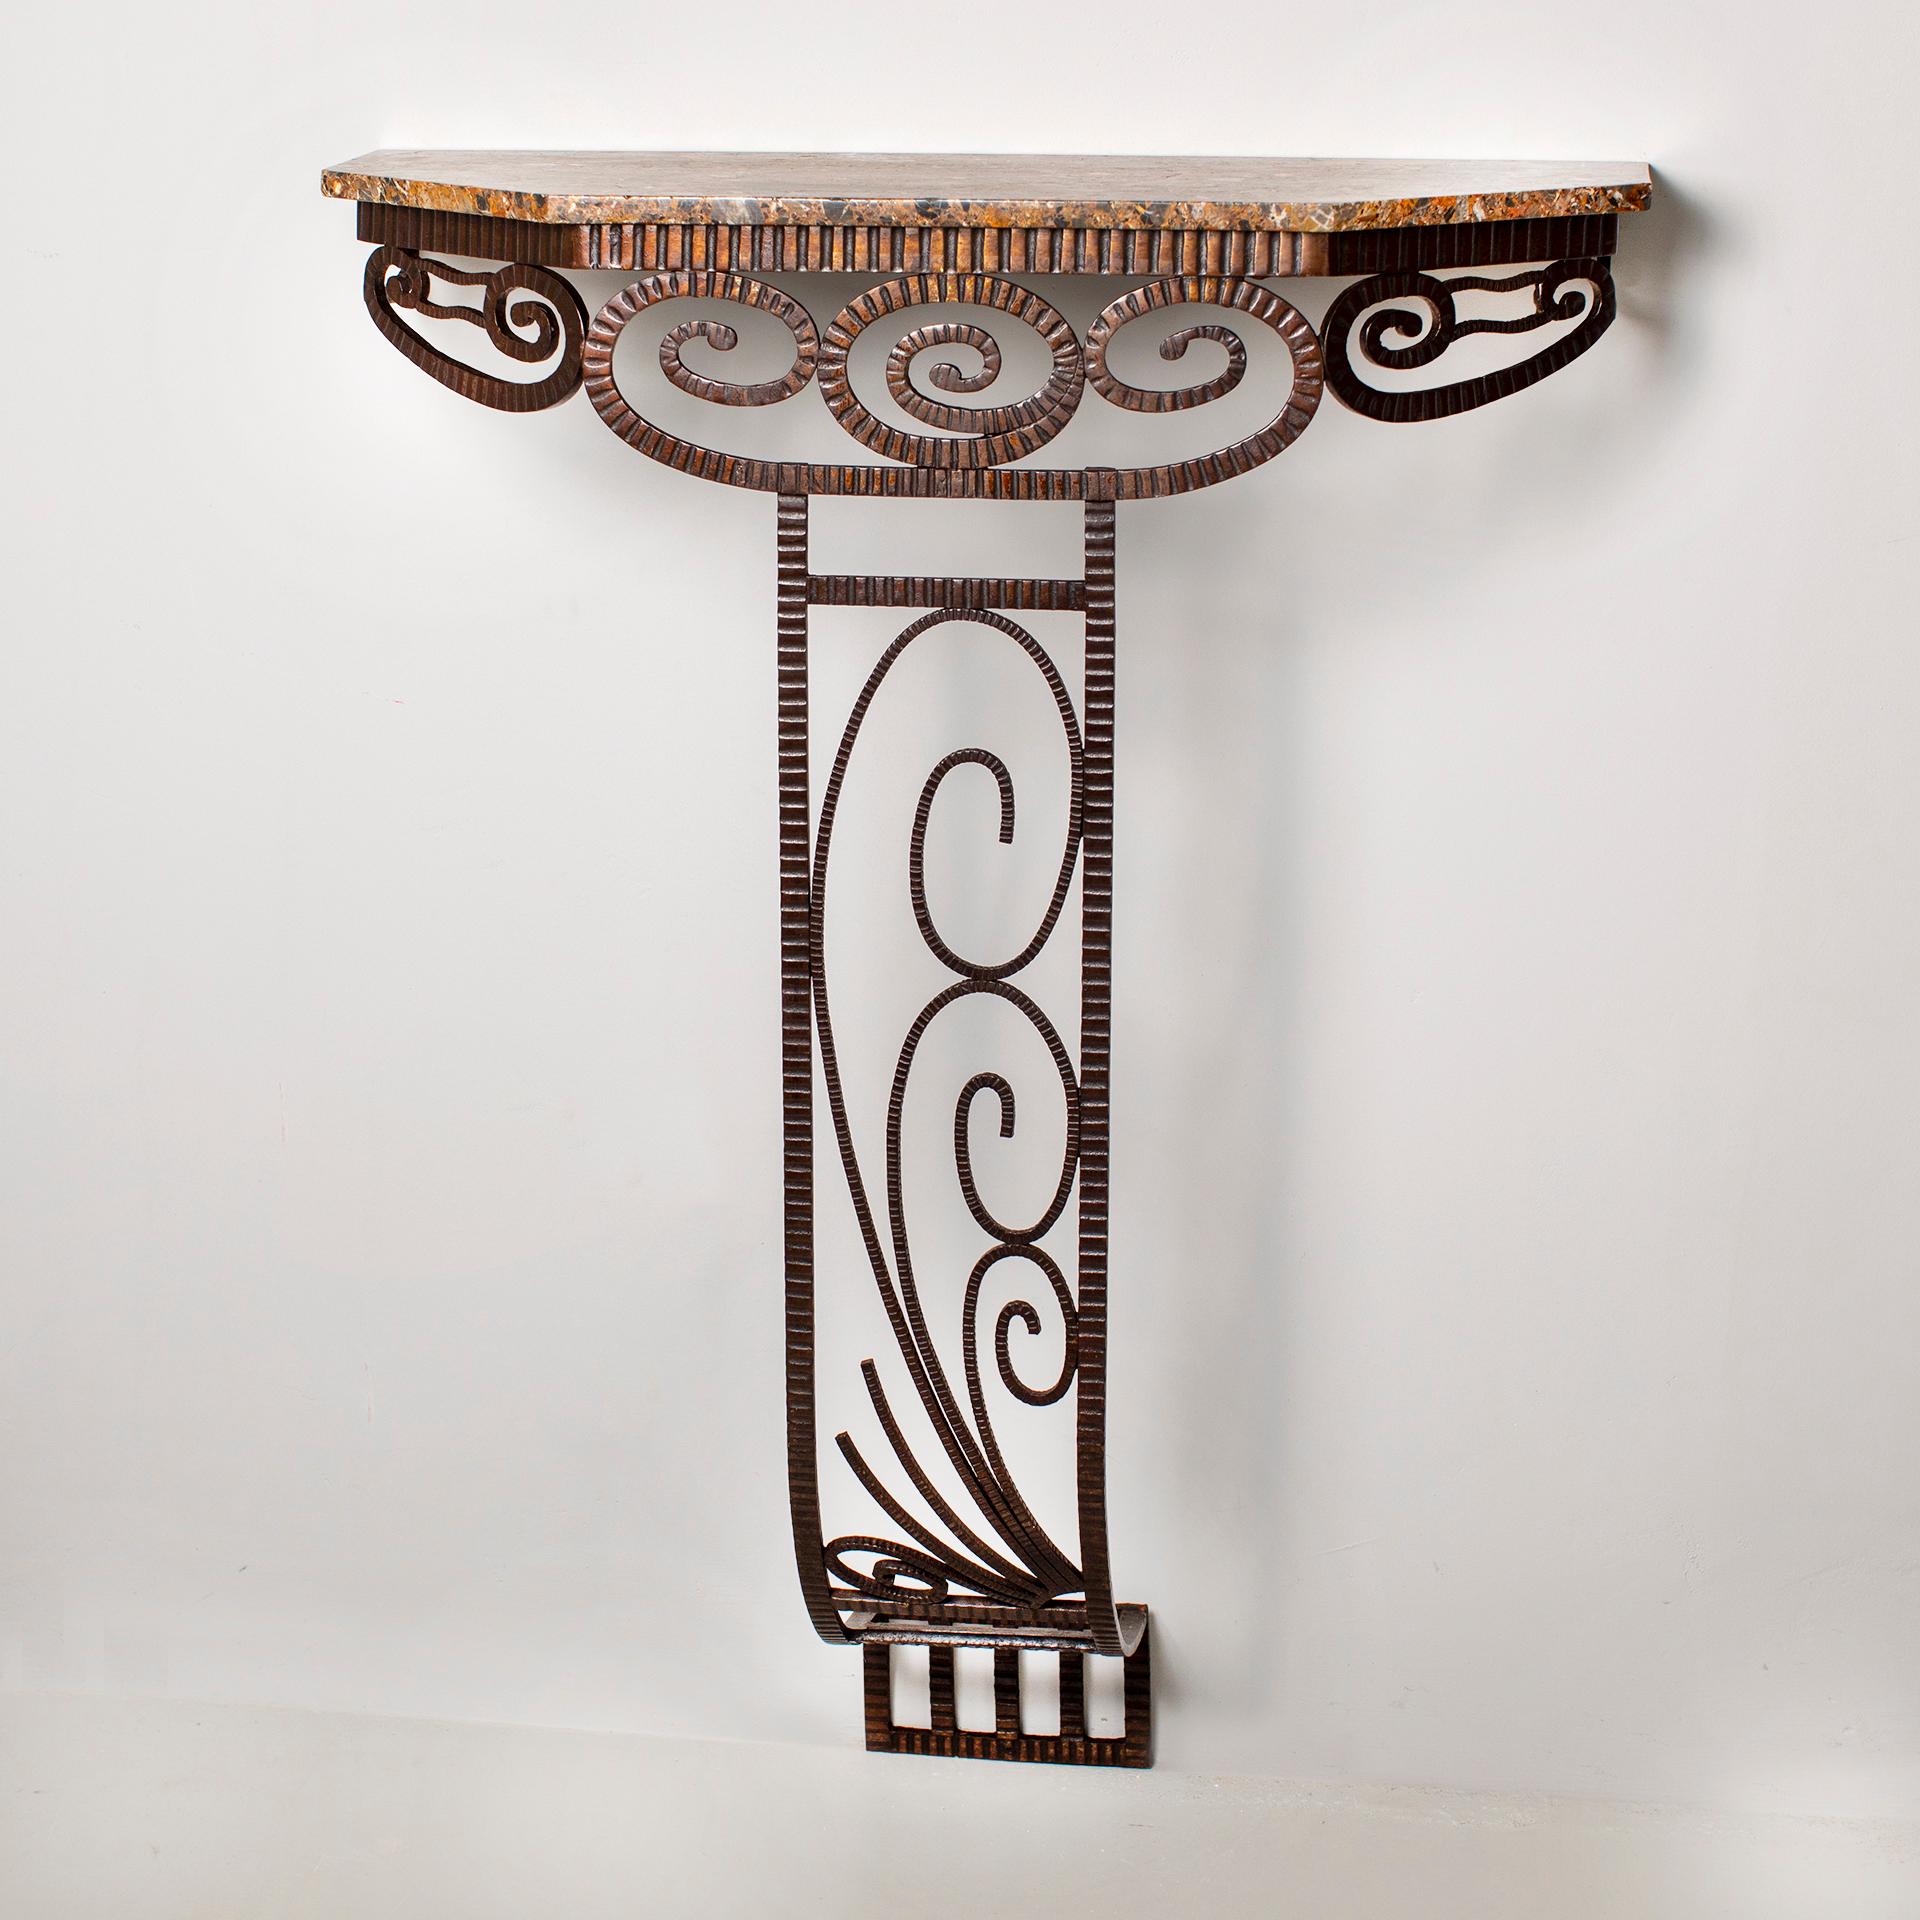 Graceful Art Deco console that captivates with its special leg design.
The object is designed with fine rods, all ribbed throughout. Sweeping, snail-like elements are located 
in the frame of the console. The central foot is straight down and runs